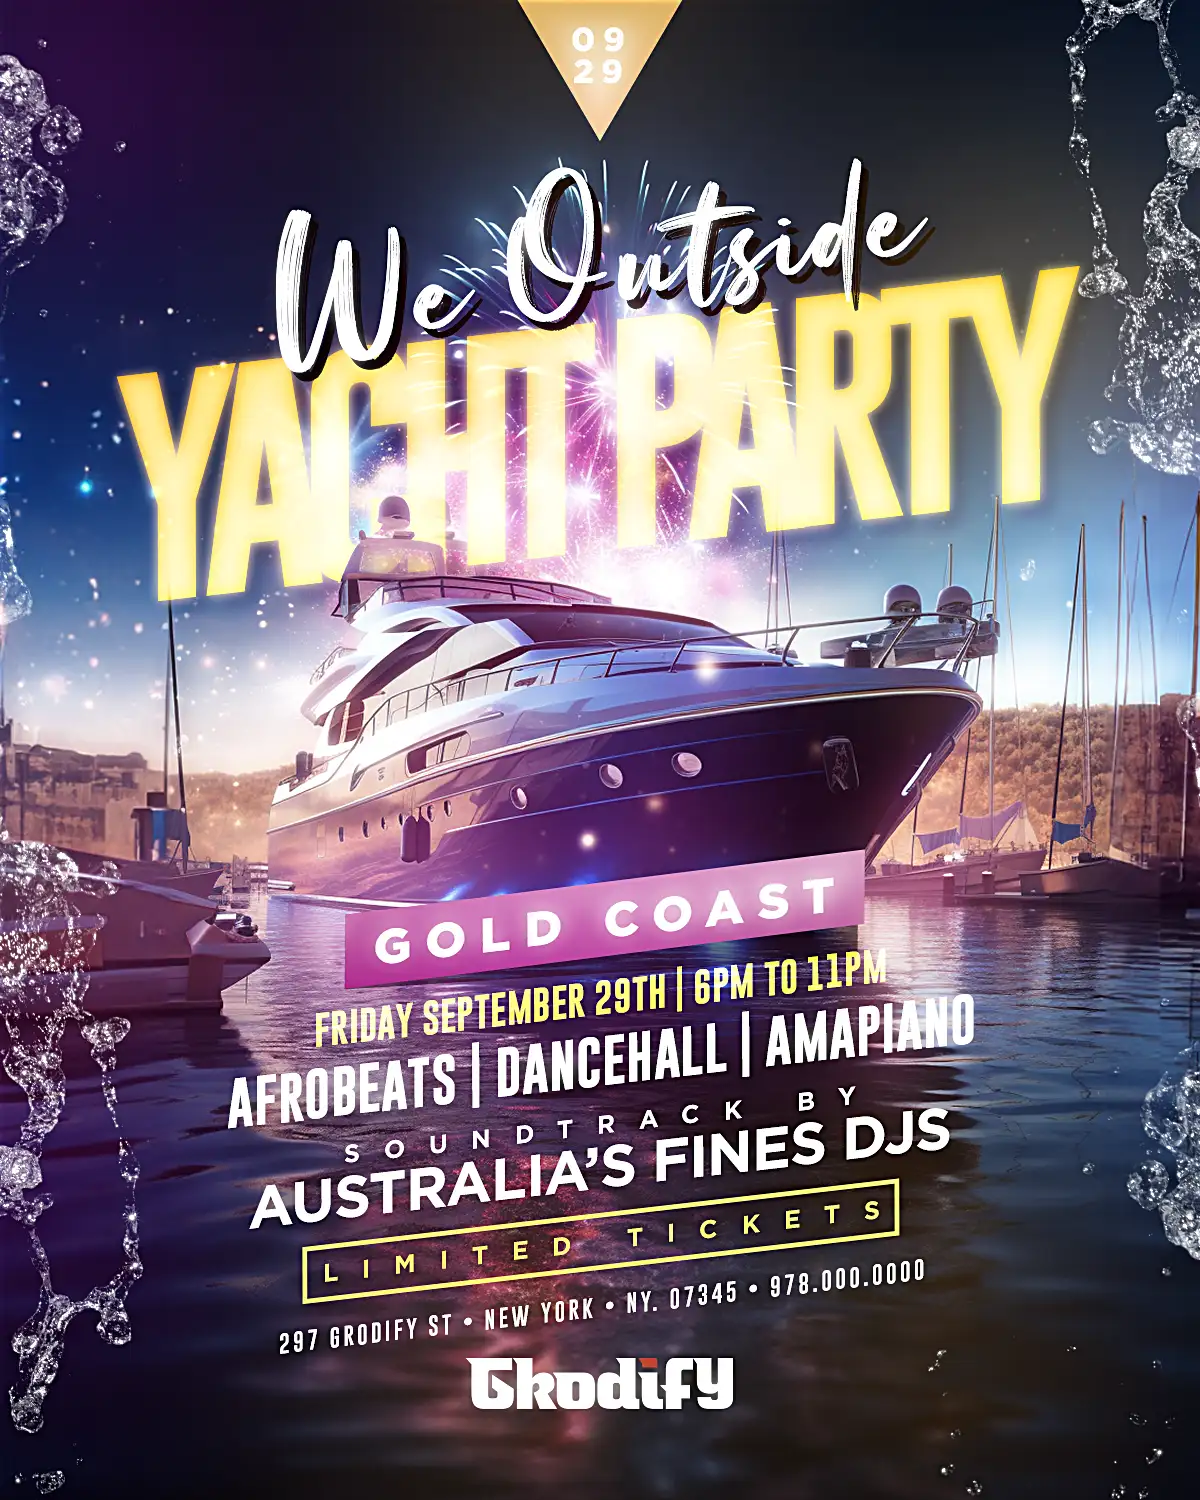 We Outside Yacht Party